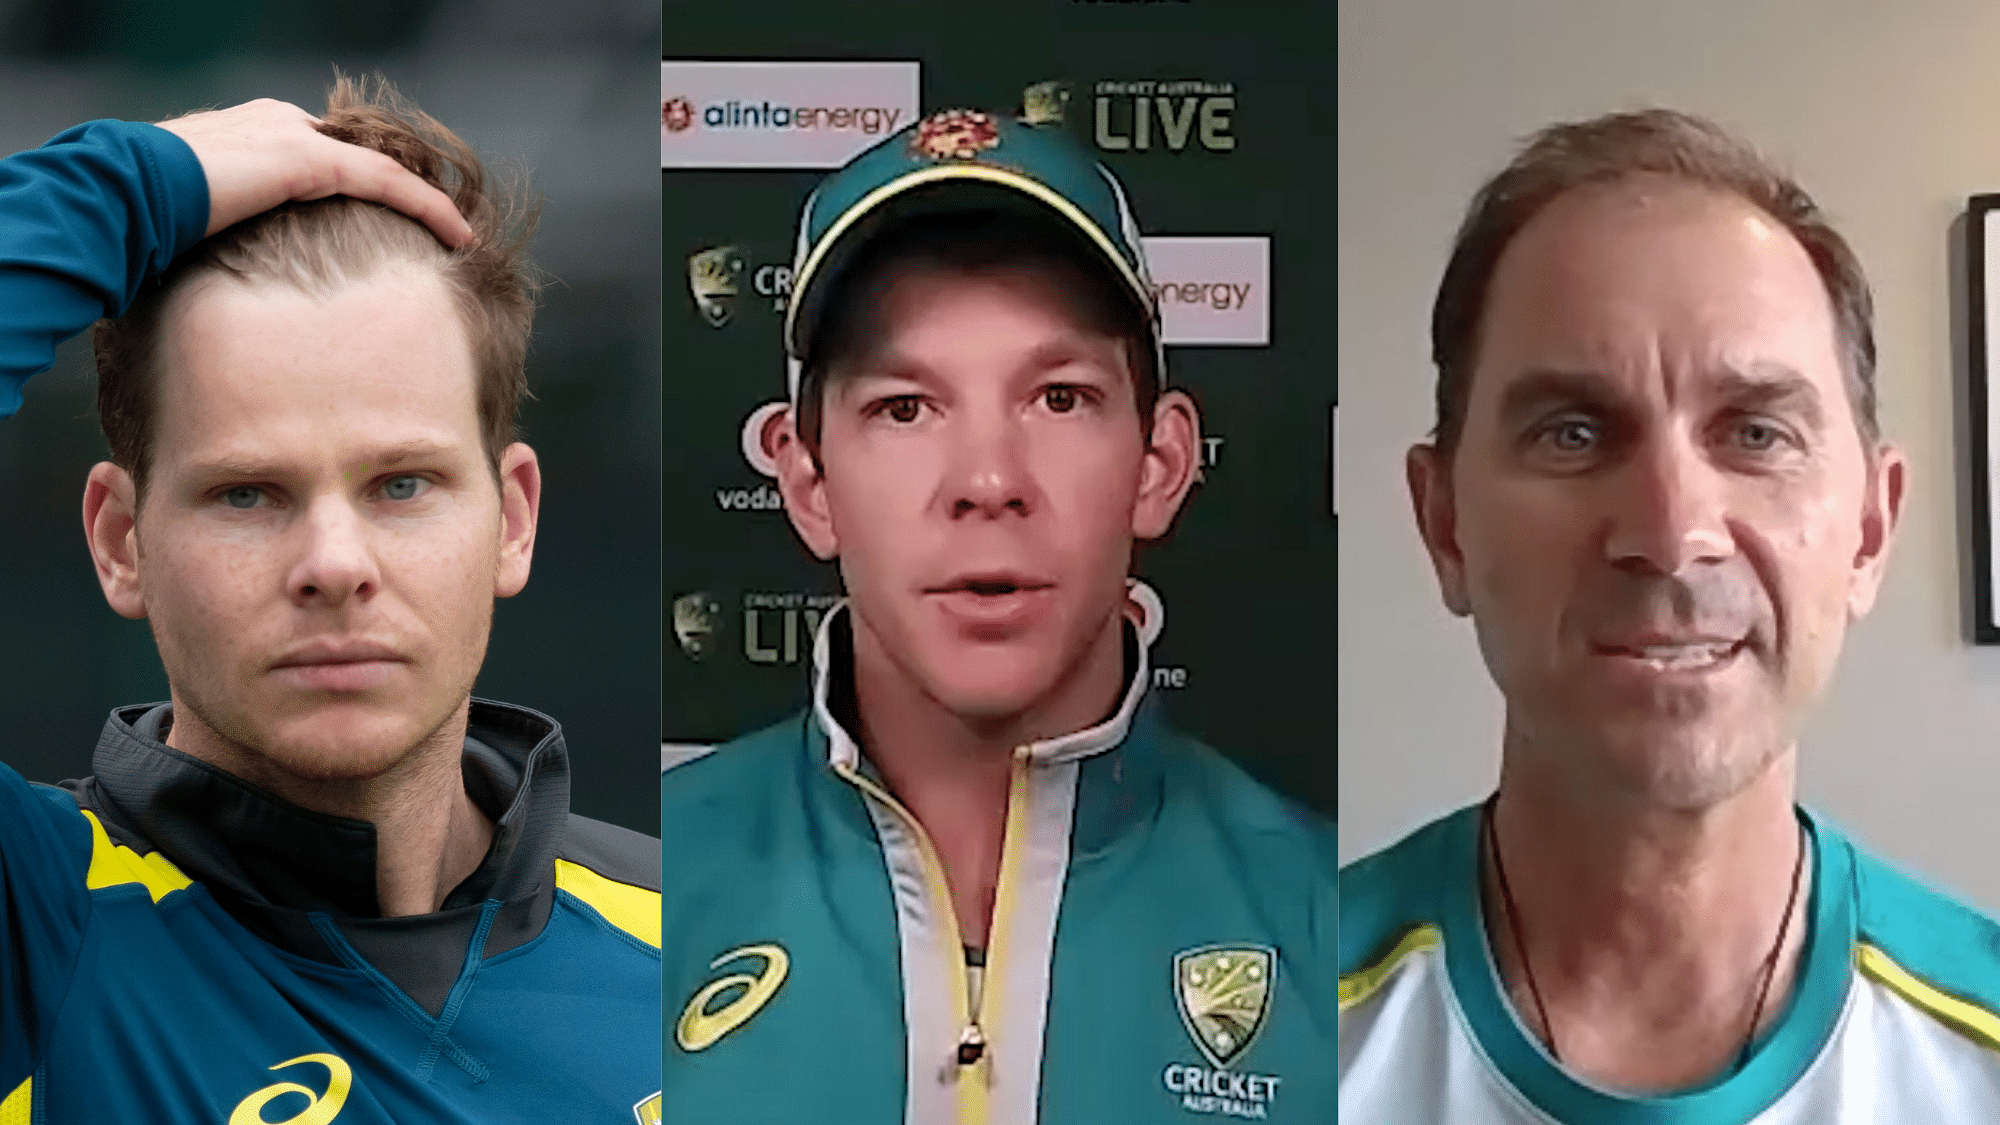 Justin Langer has defended both Steve Smith and Tim Paine’s actions during the SCG Test that have been heavily criticised.